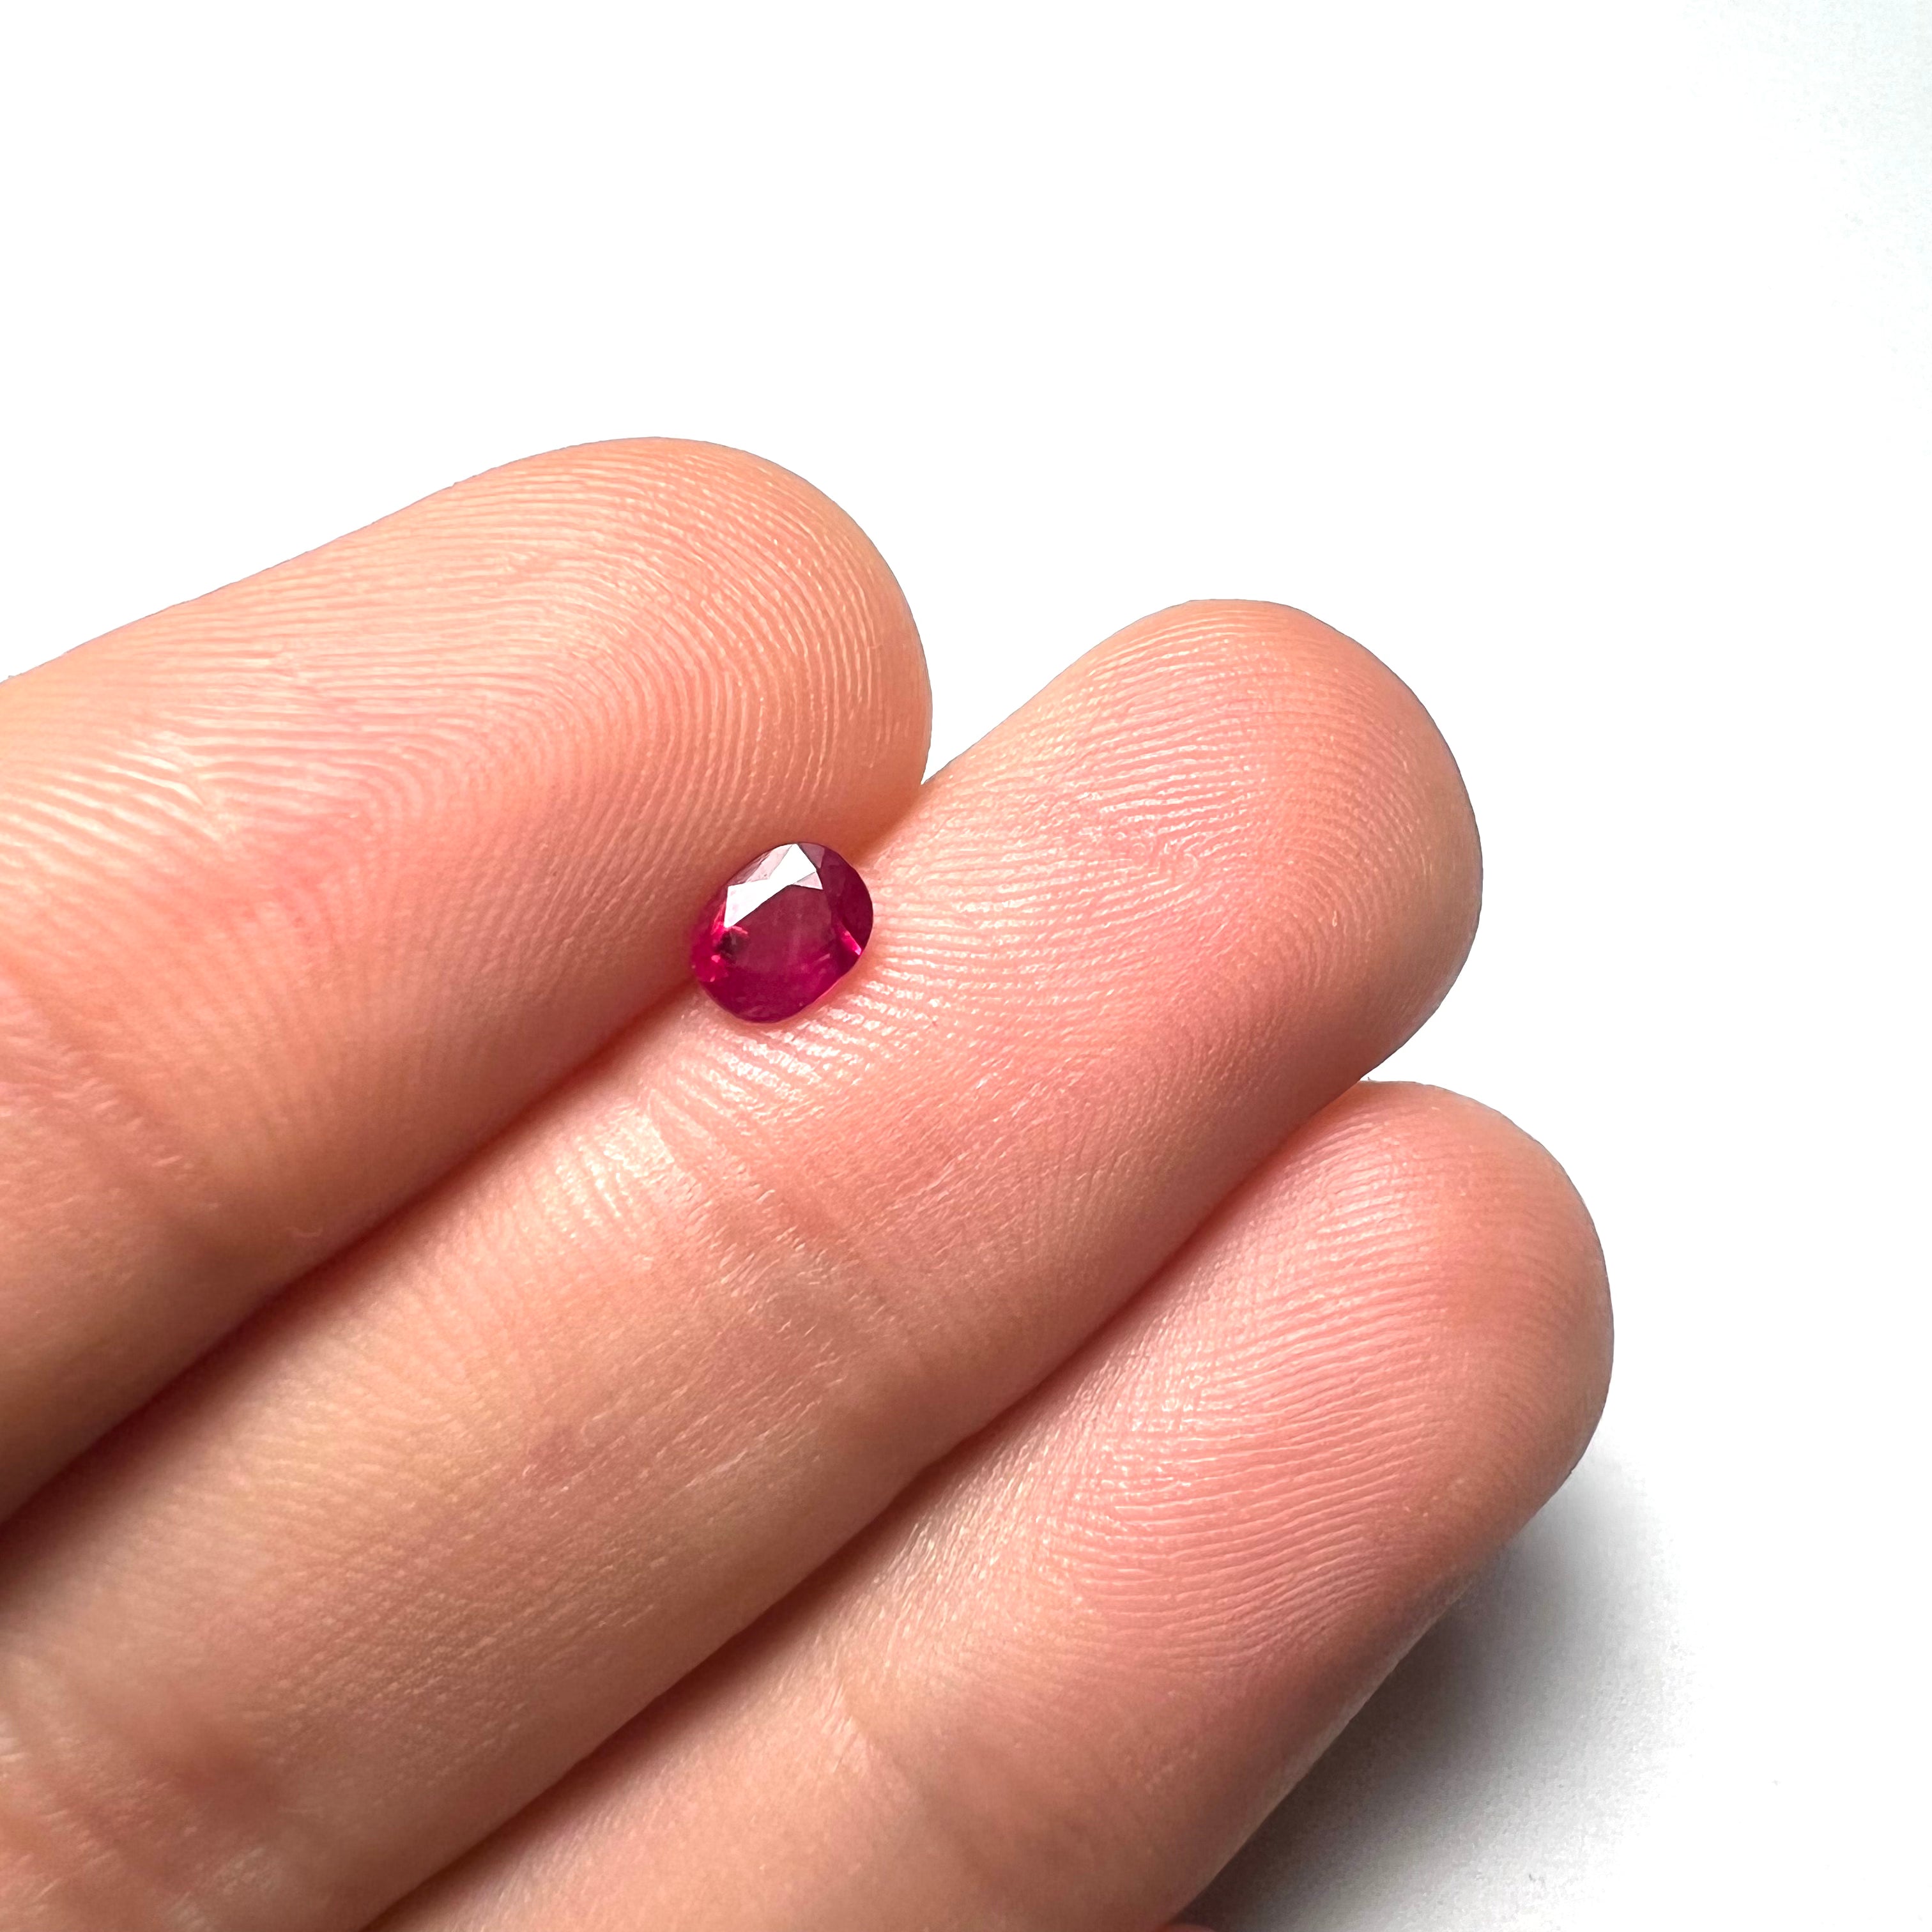 .47CT Loose Natural Oval Ruby 5x4x2mm Earth mined Gemstone